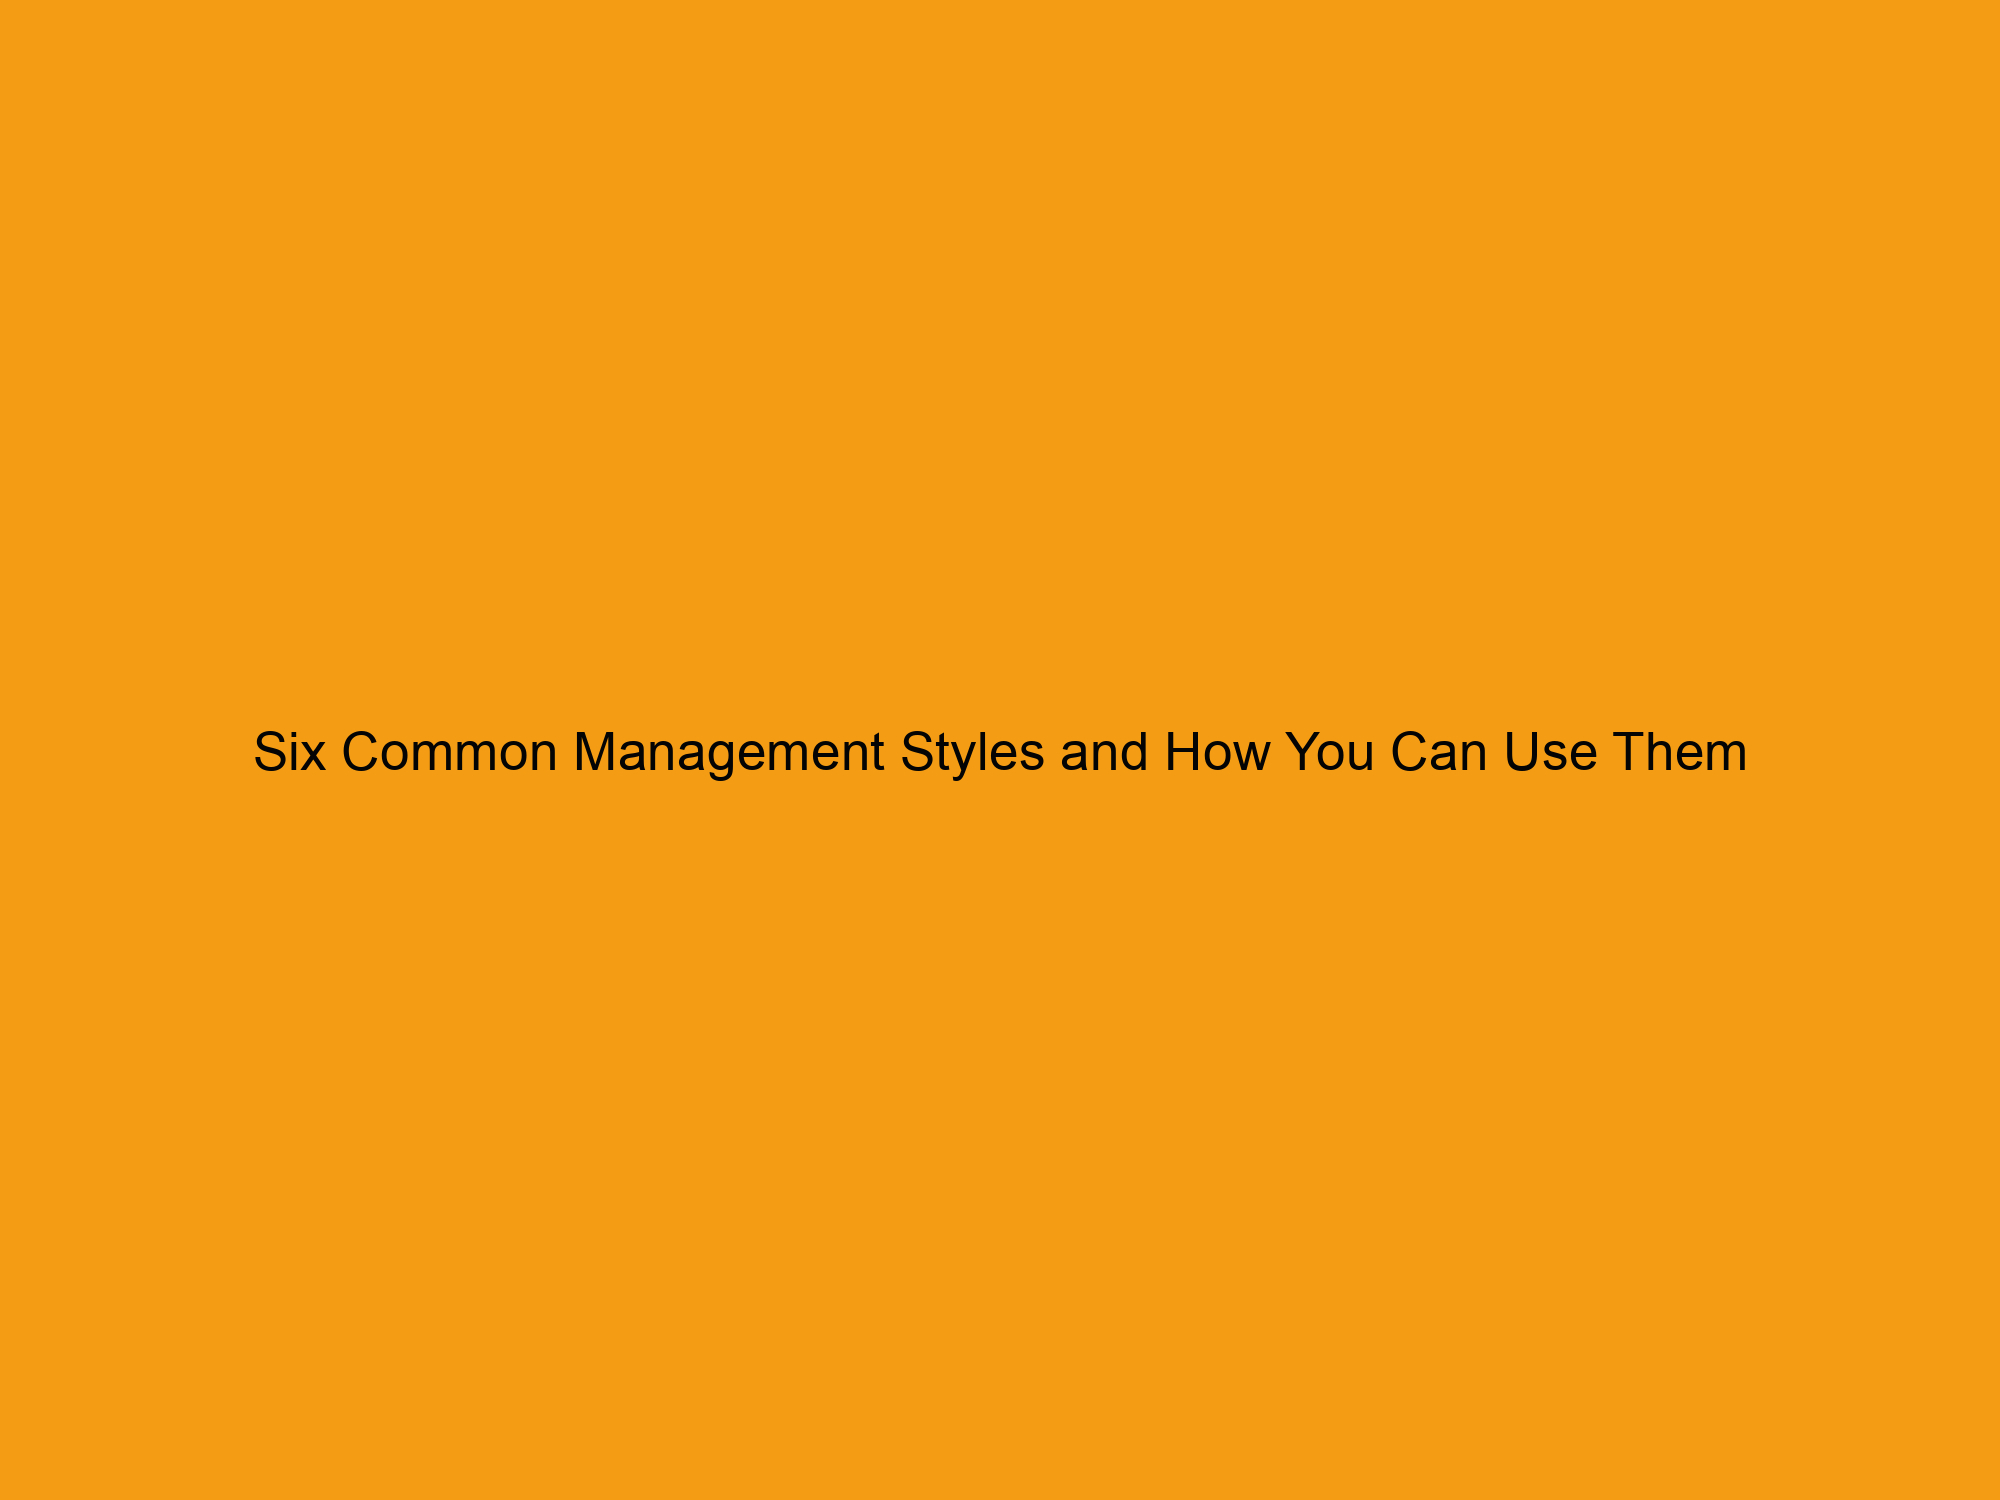 Six Common Management Styles and How You Can Use Them